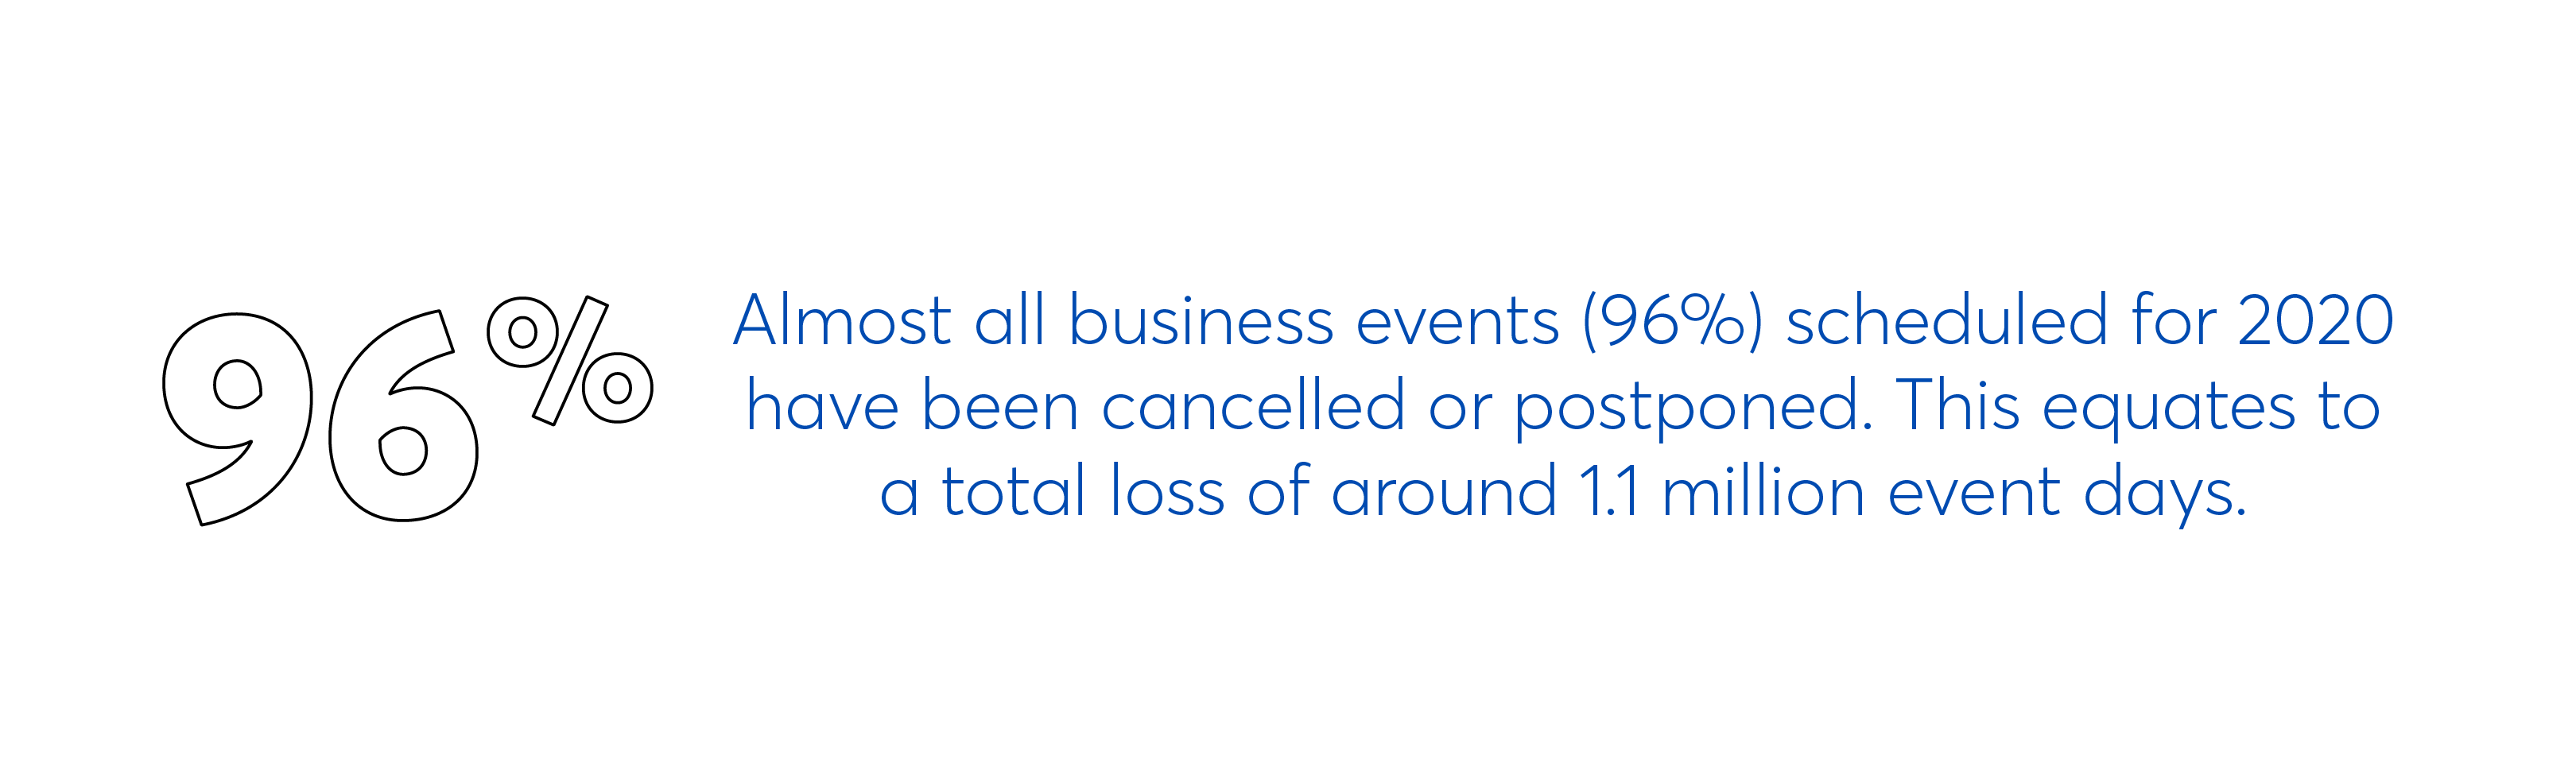 96% business events cancelled